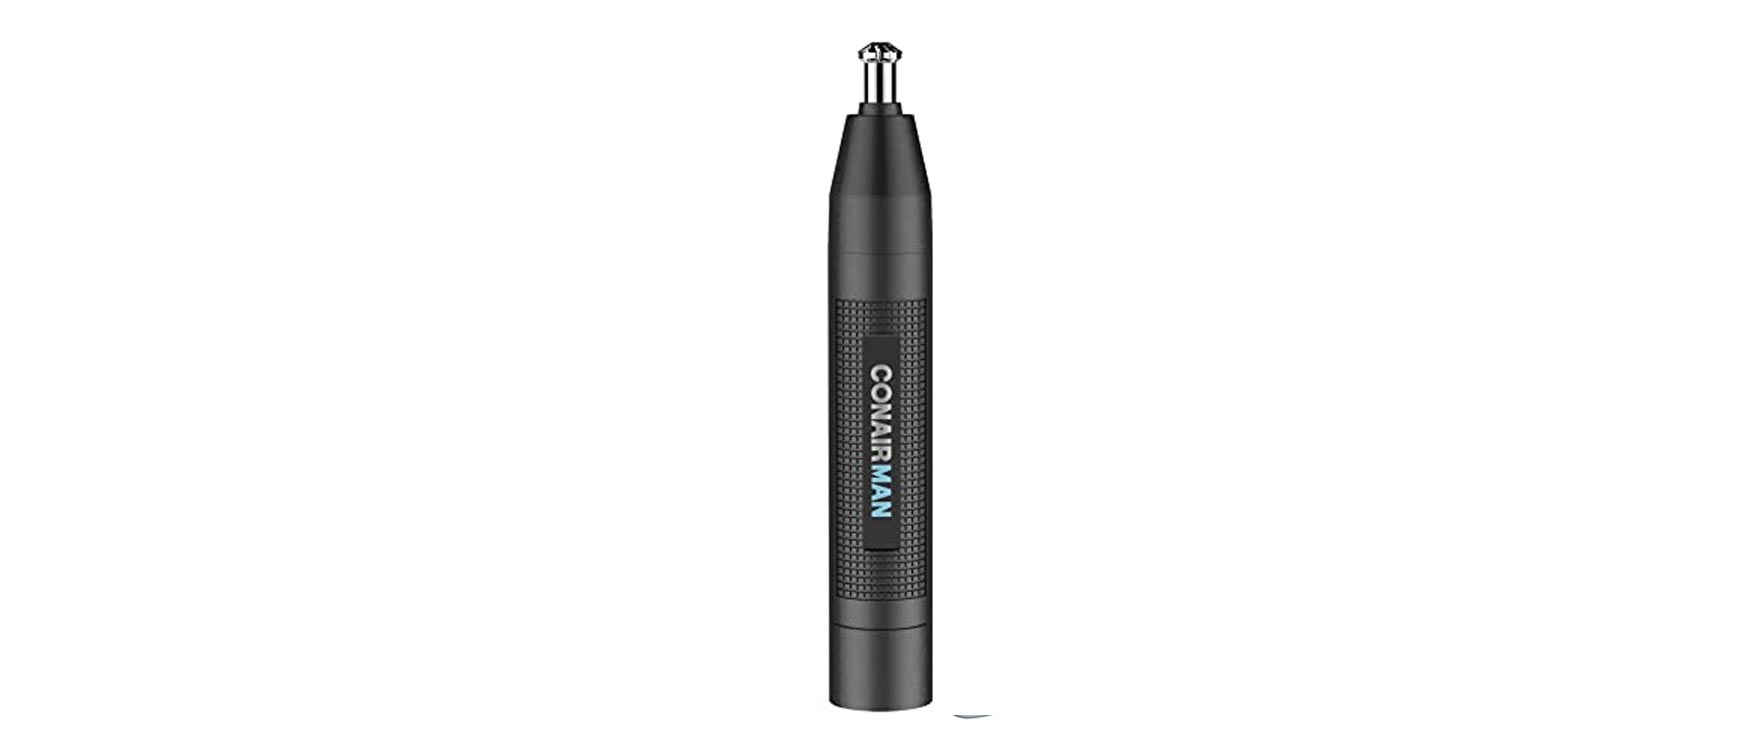 4. ConairMAN Lithium-Powered Ear and Nose Hair Trimmer